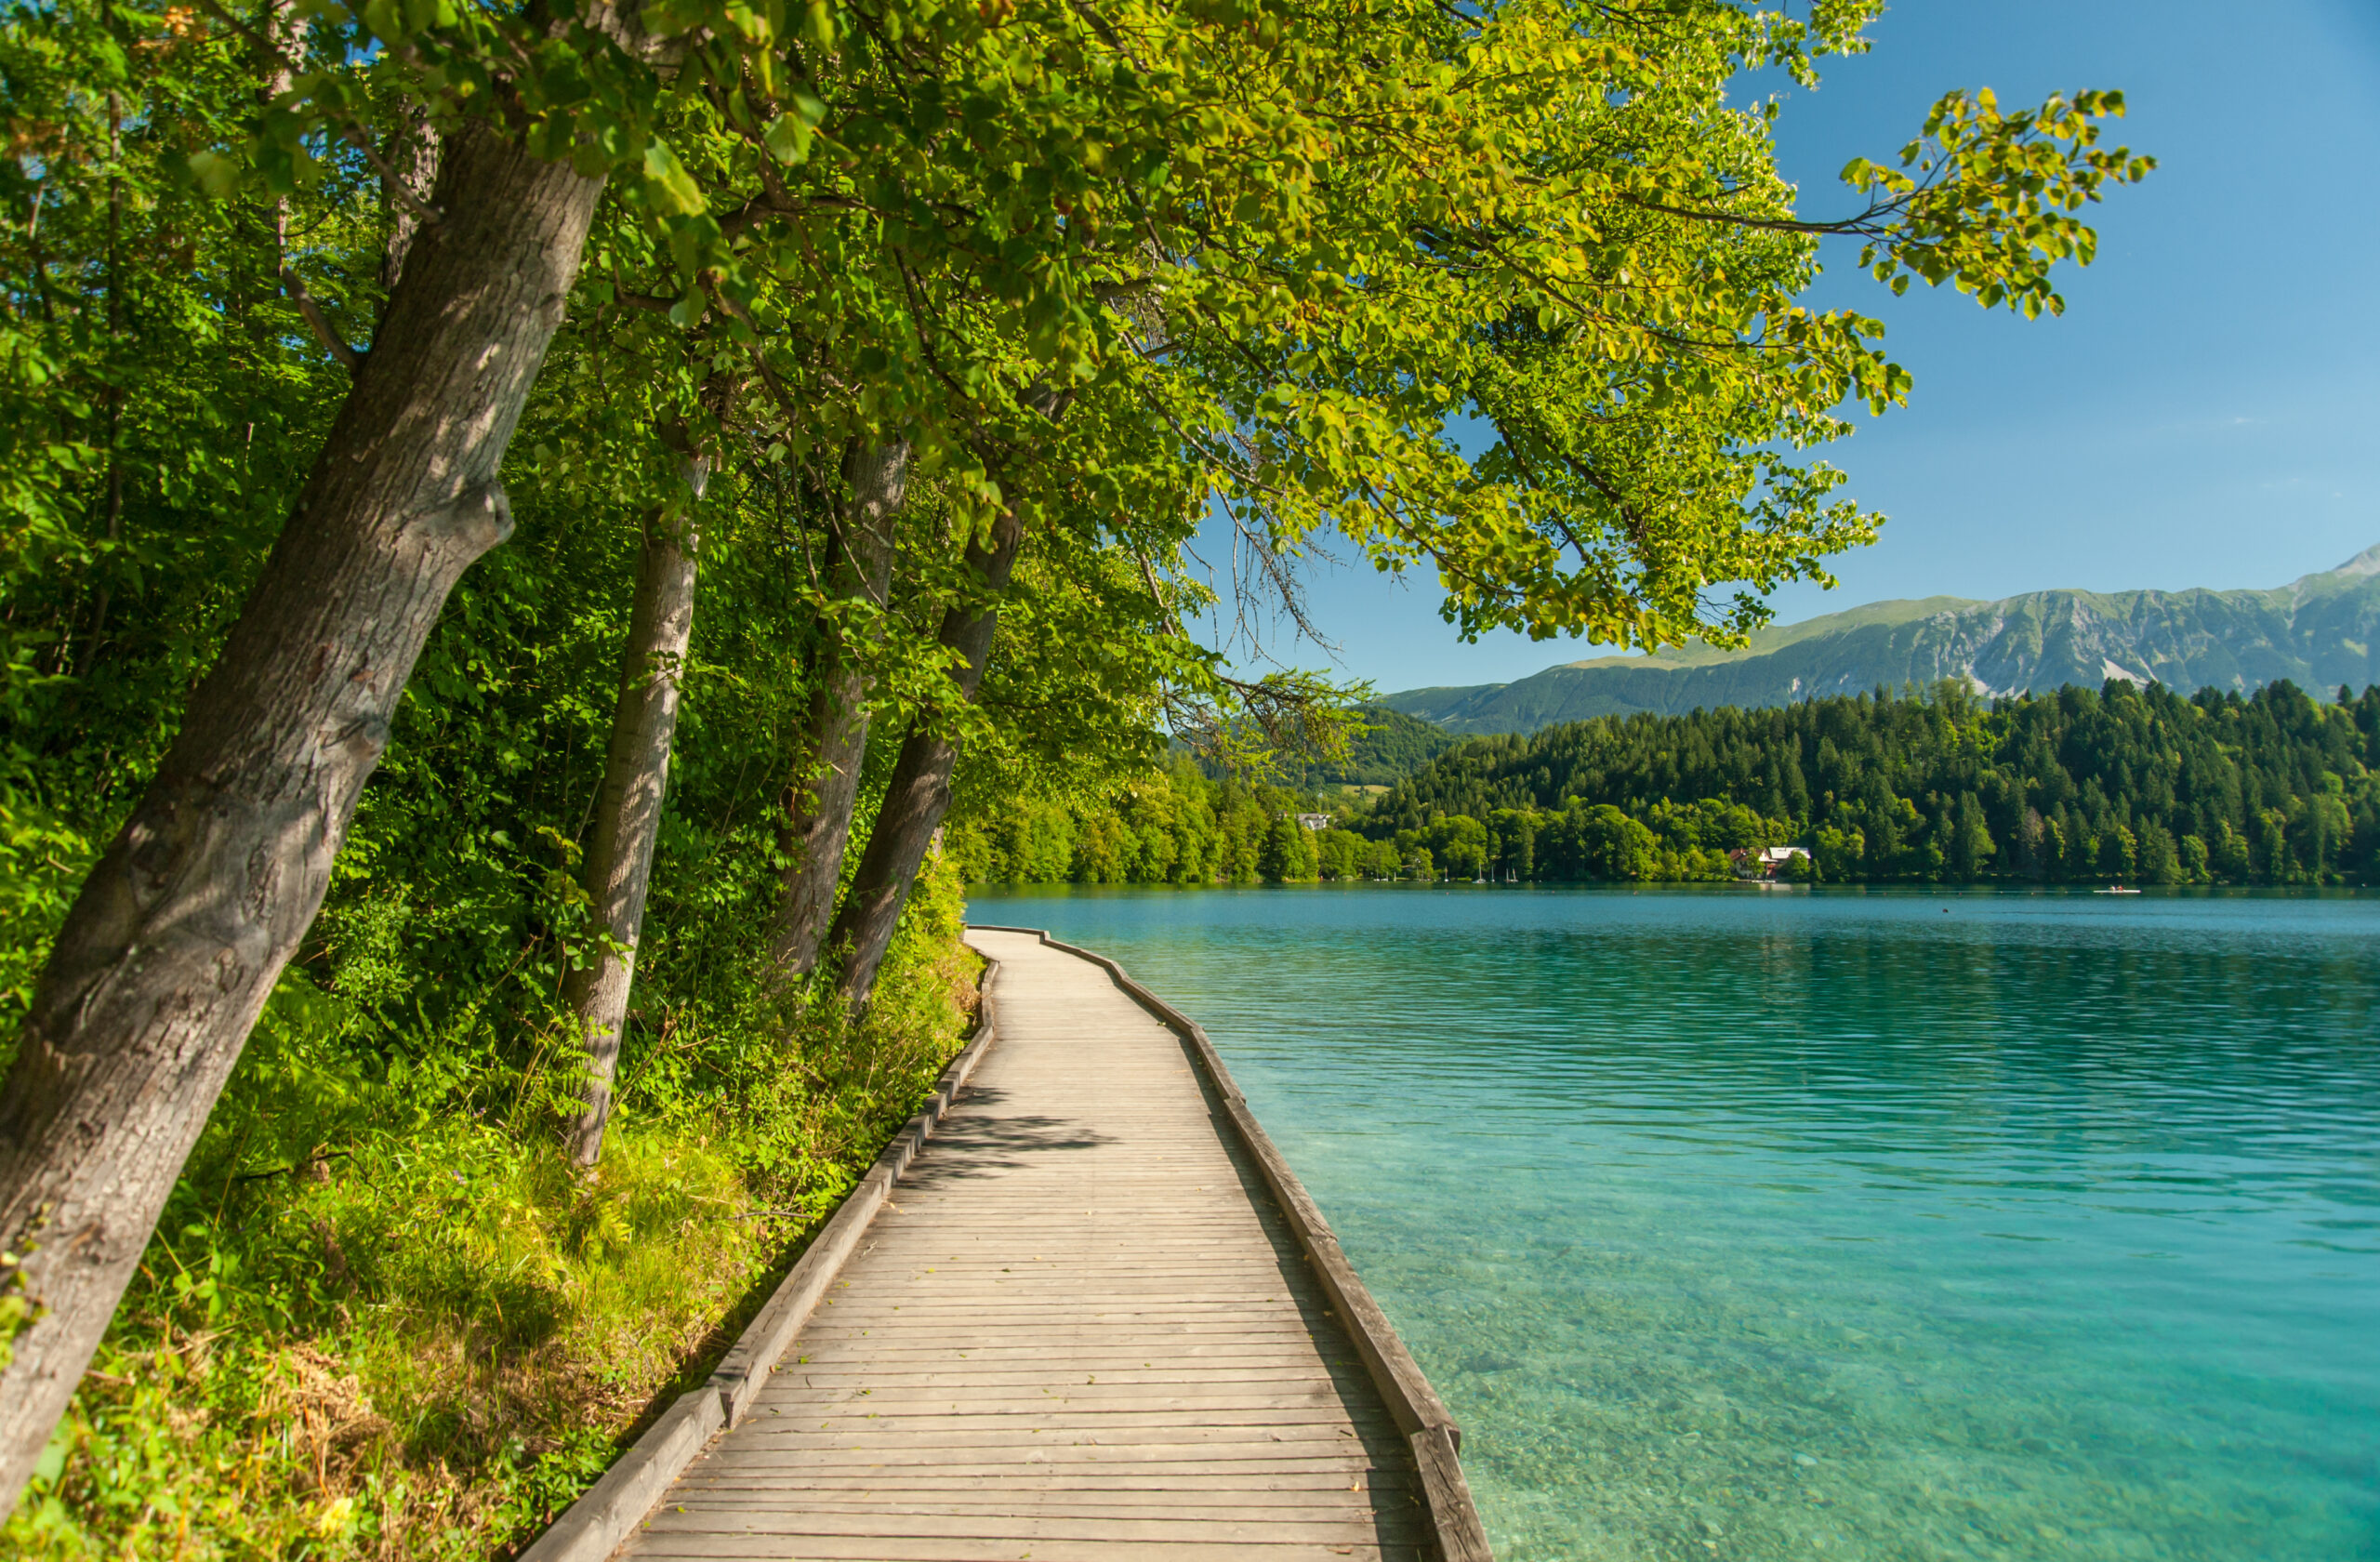 Lake with wooden boardwalk with turquoise water.